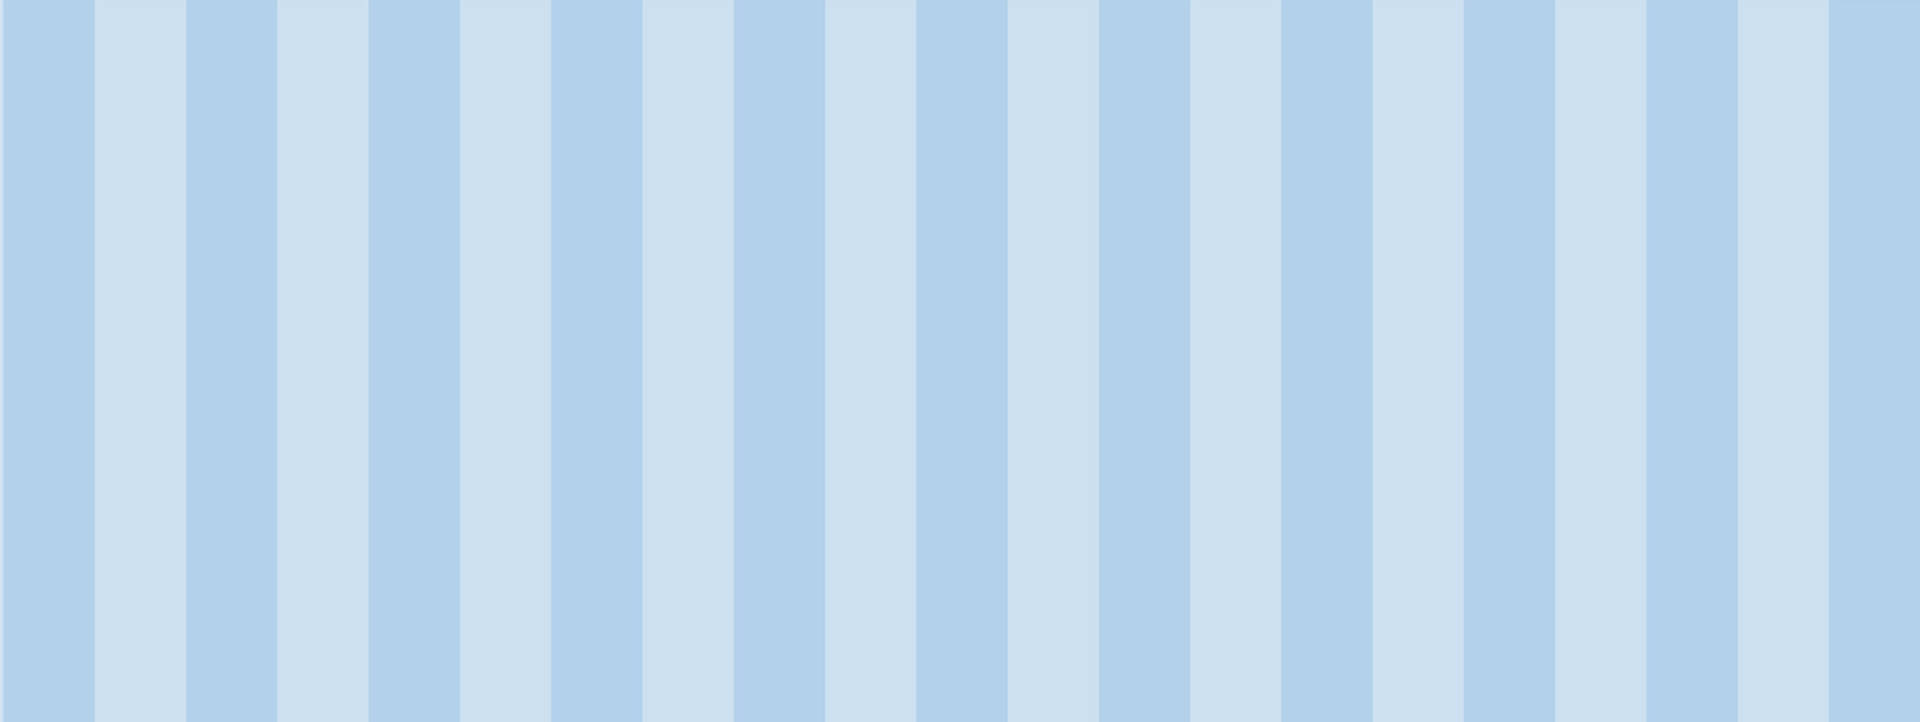 3901X1467 Baby Blue Wallpaper and Background